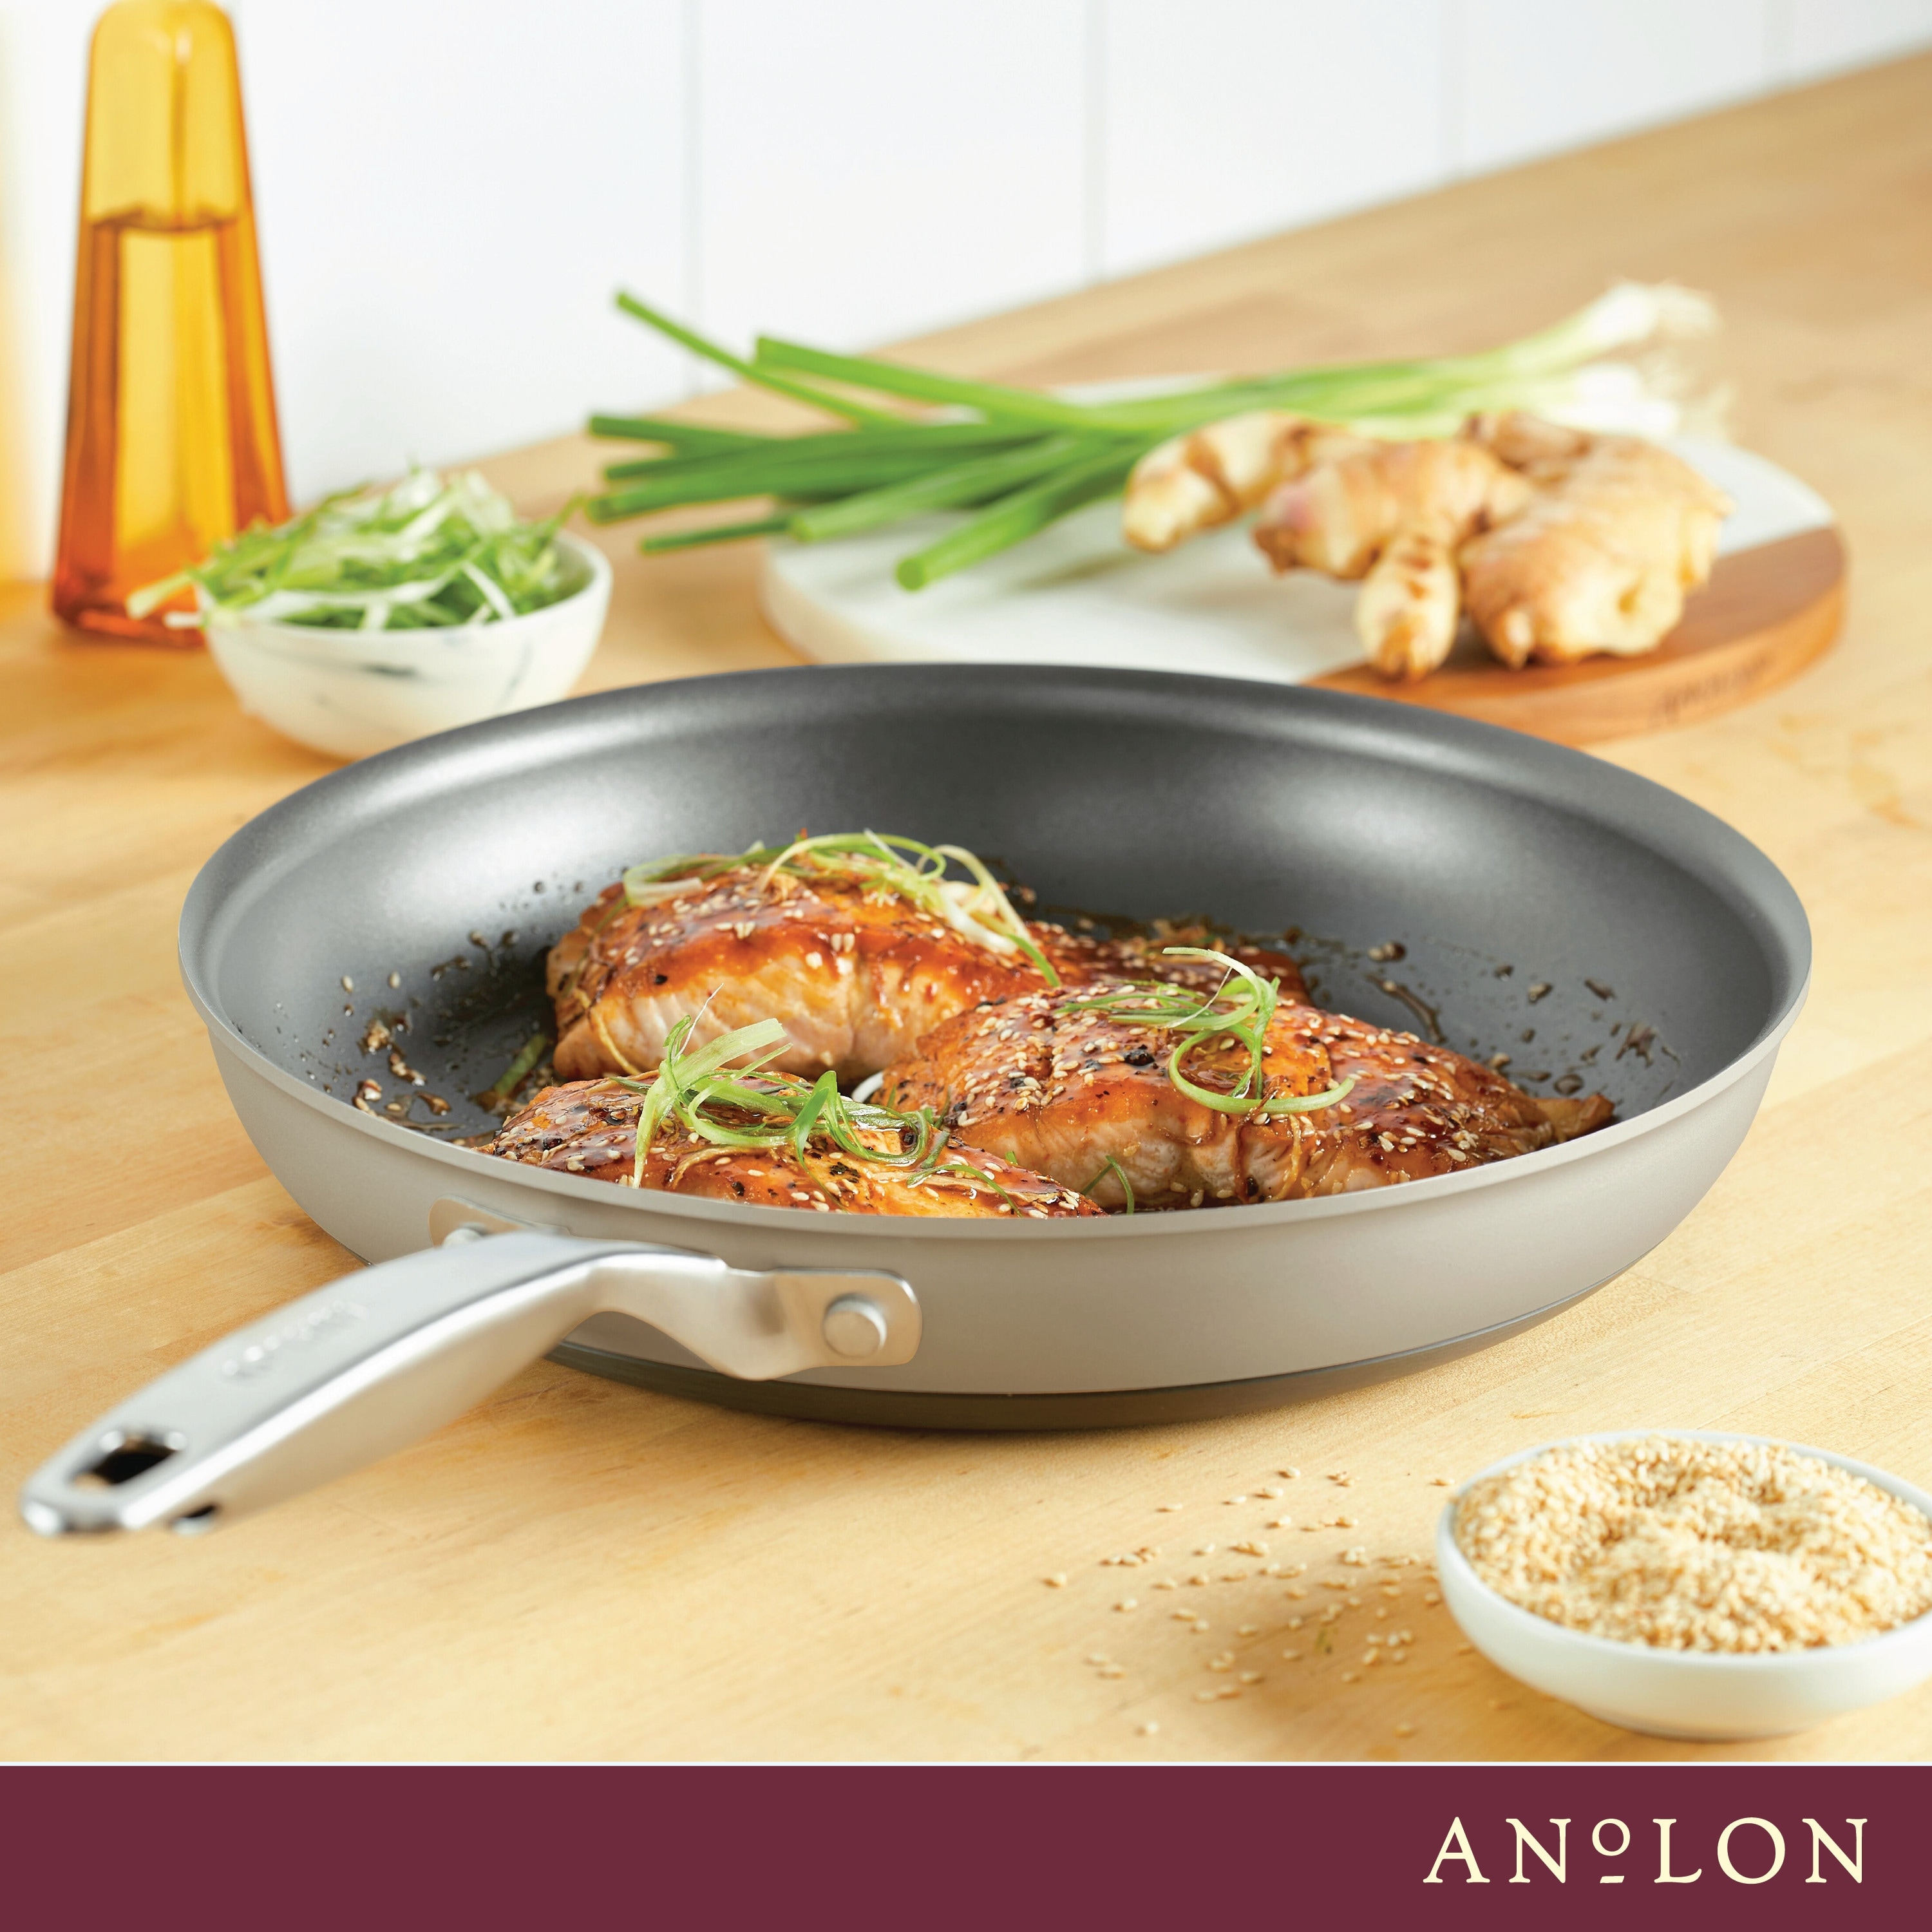 Anolon Achieve 12 Nonstick Hard Anodized Frying Pan Silver